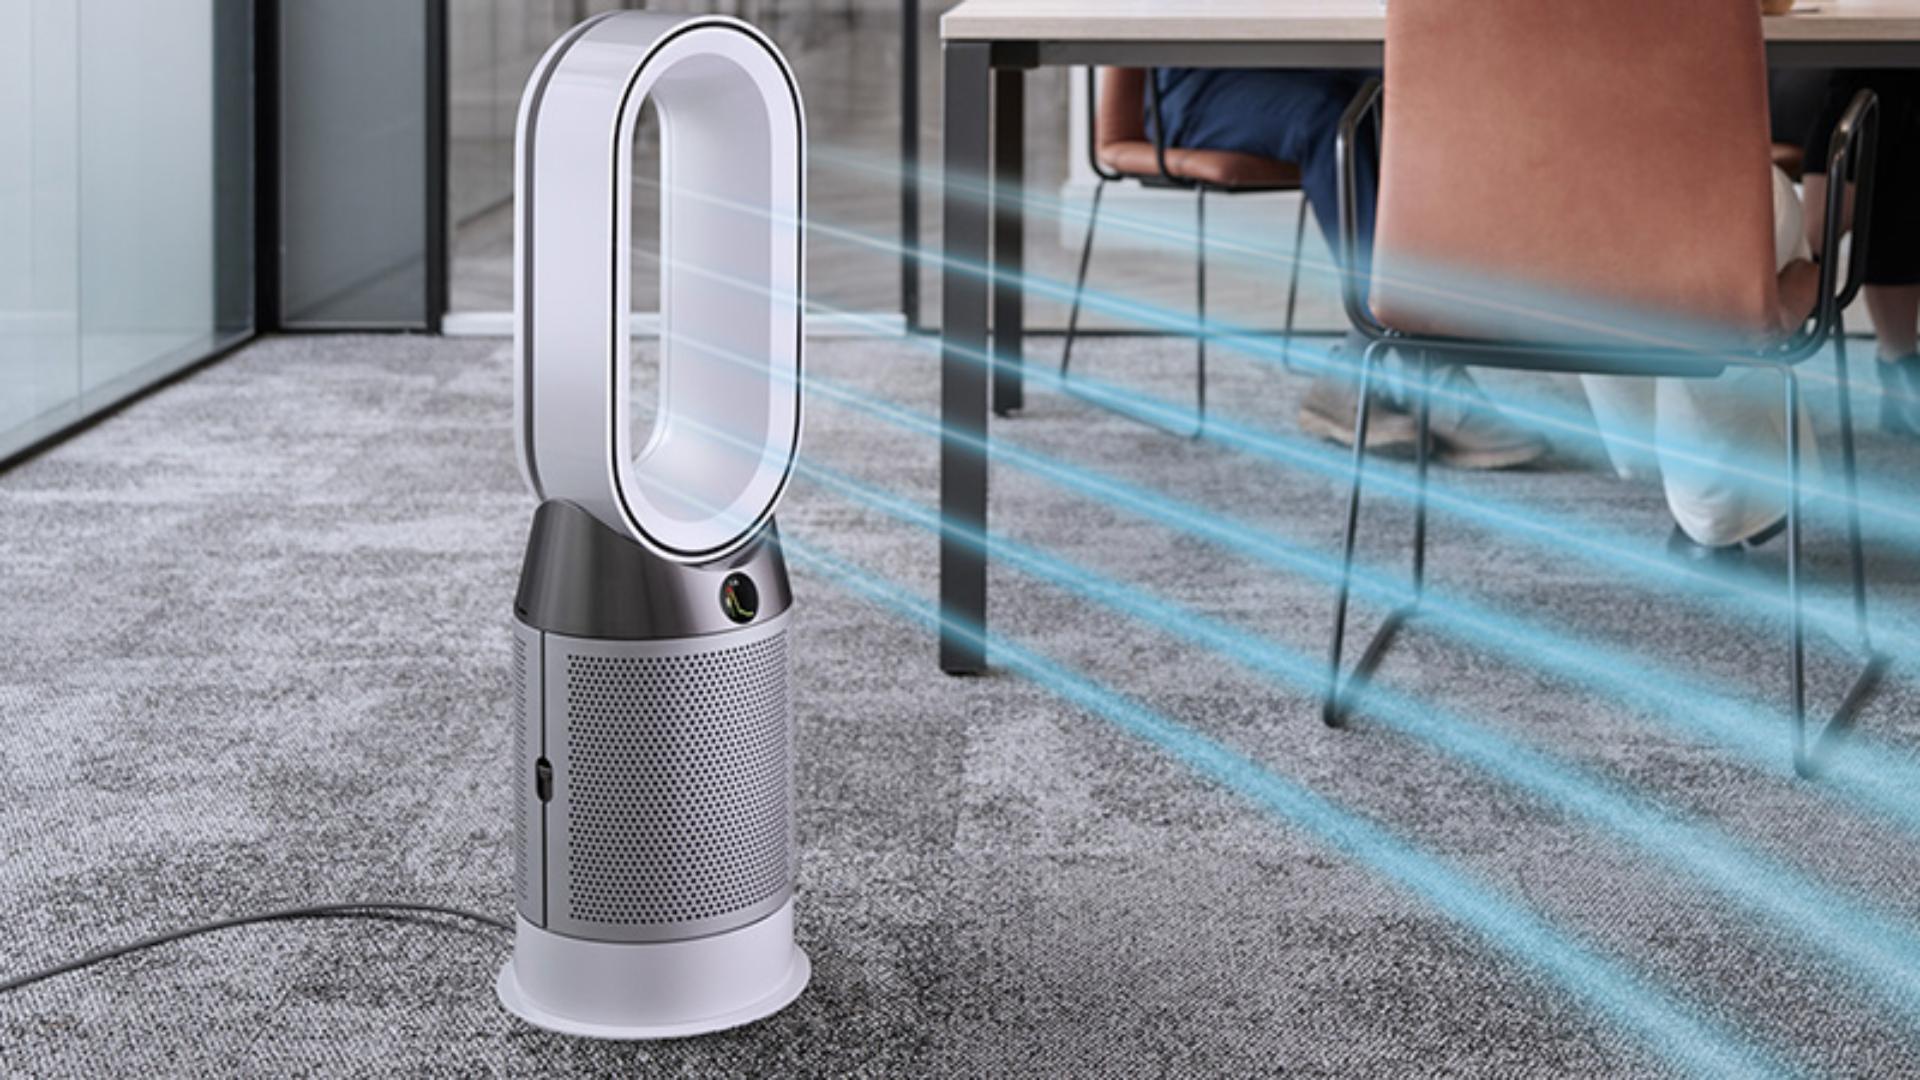 Dyson Pure Hot+Cool purifier in commercial setting